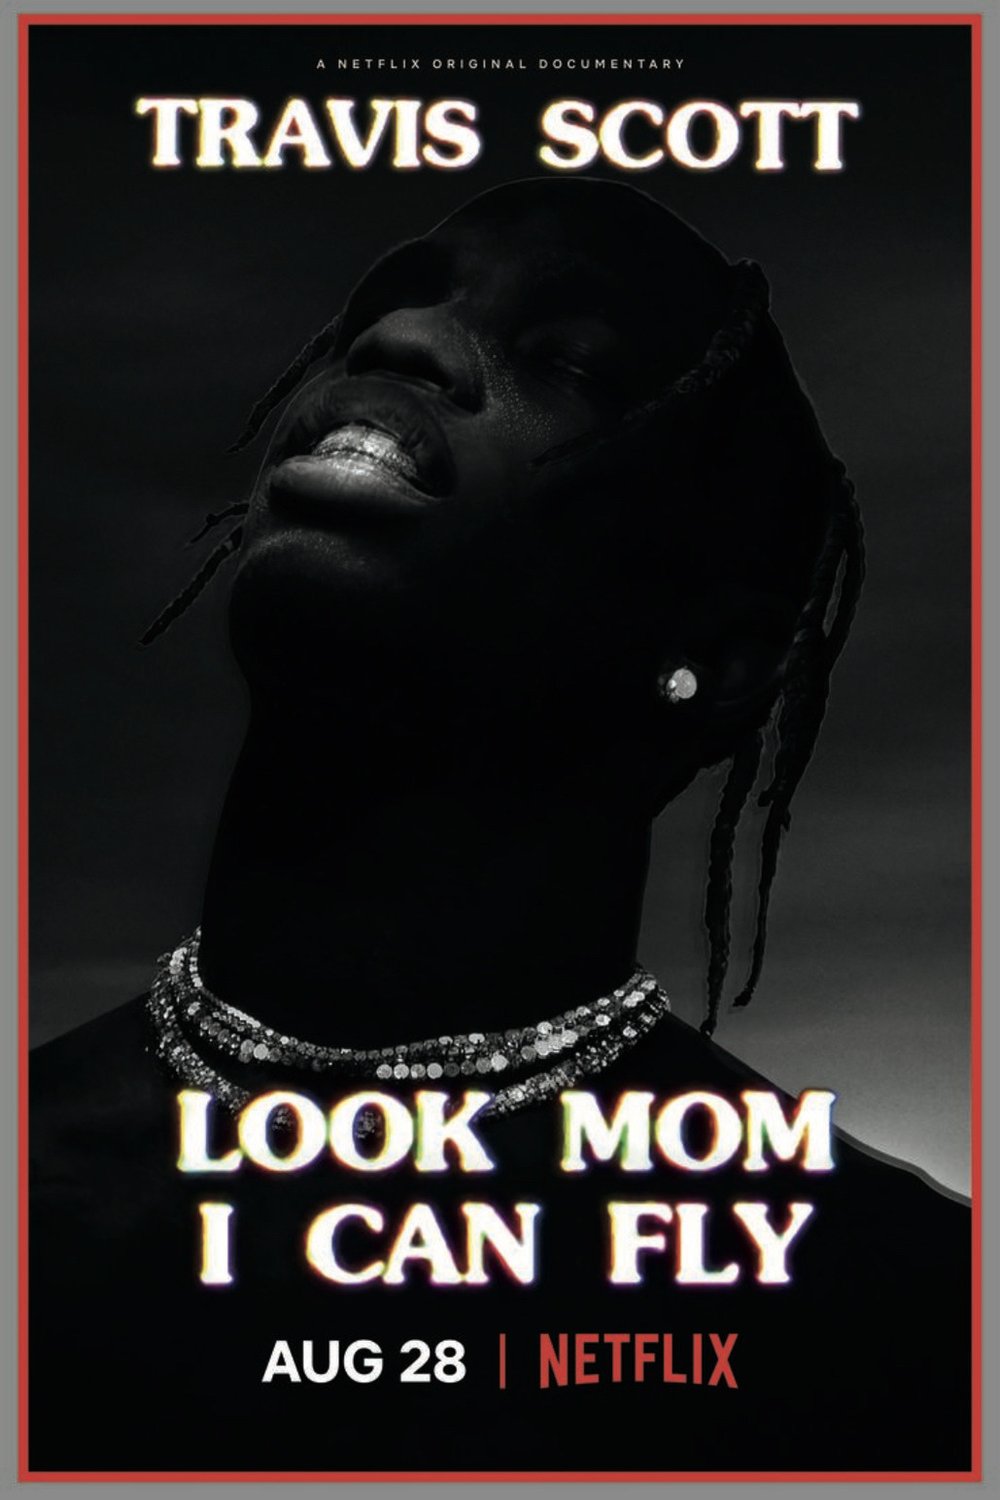 Poster of the movie Travis Scott: Look Mom I Can Fly